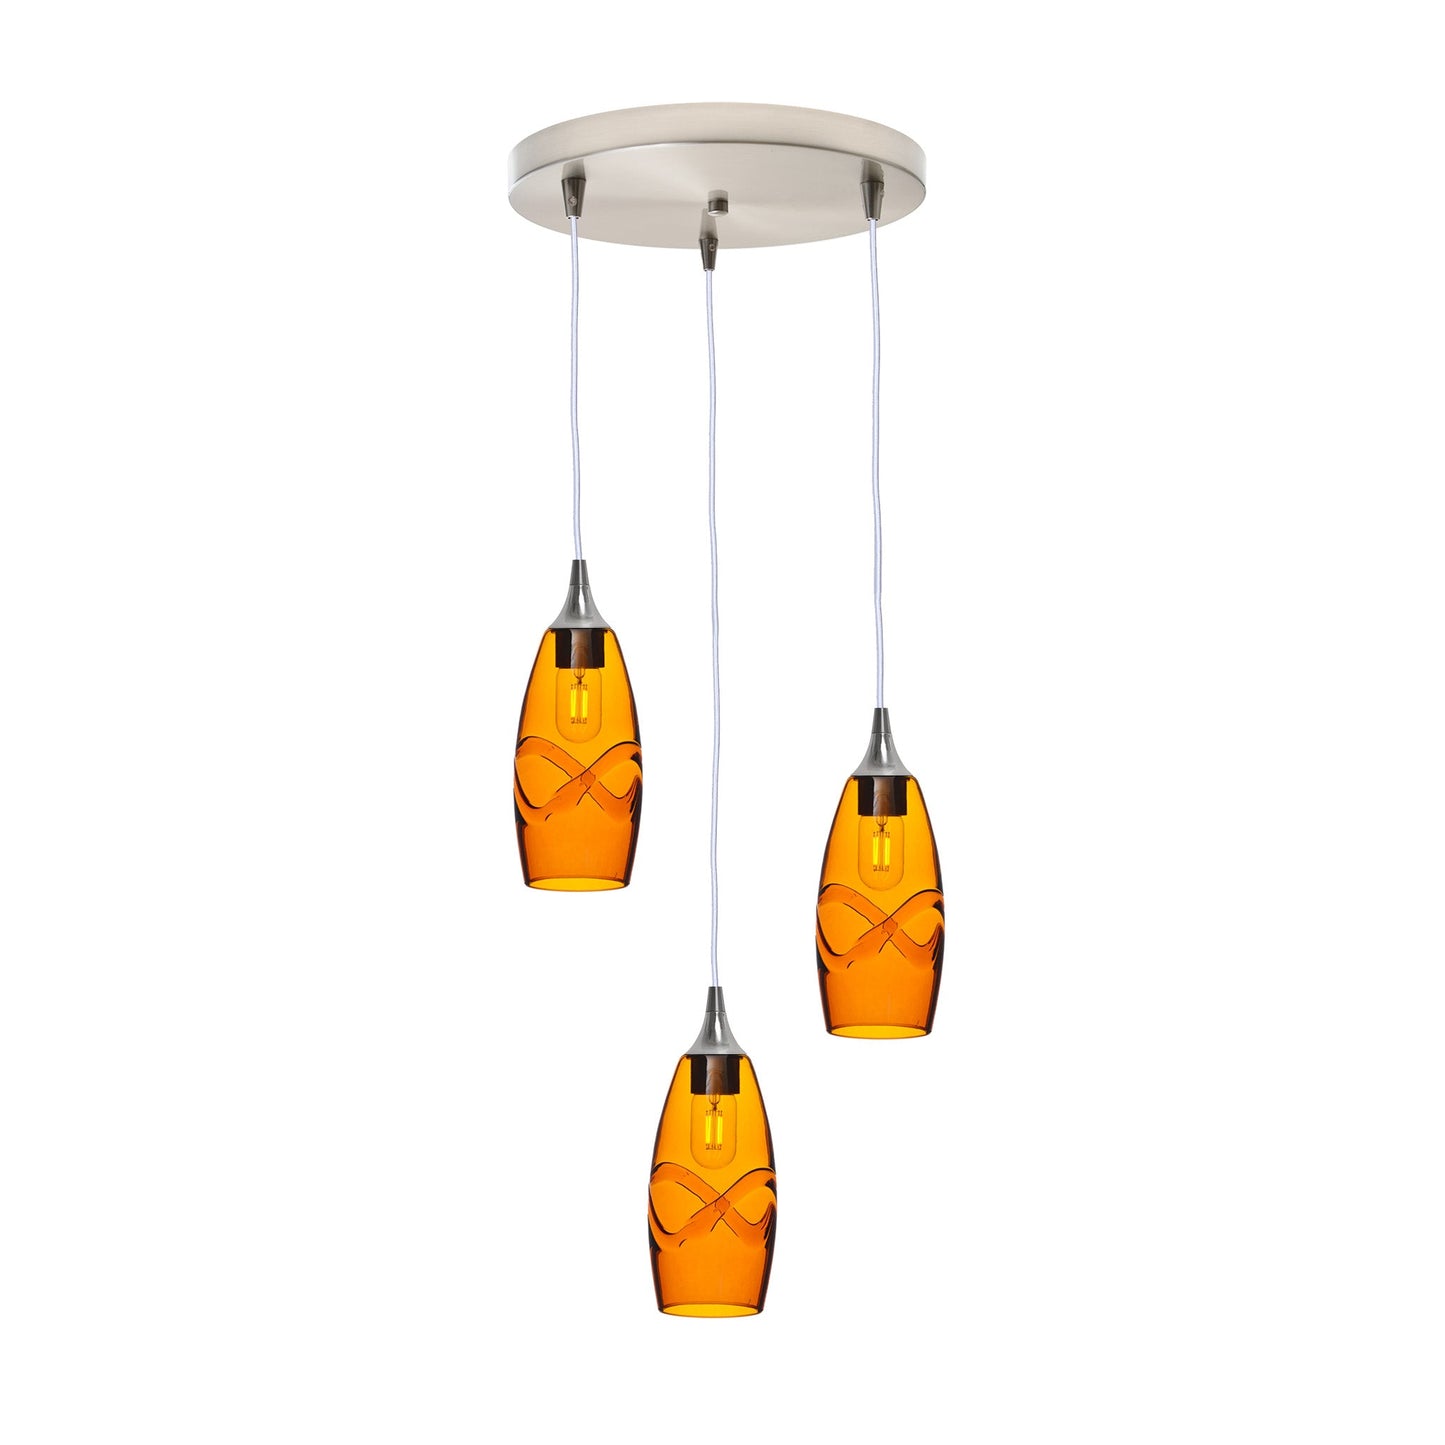 147 Swell: 3 Pendant Cascade Chandelier-Glass-Bicycle Glass Co - Hotshop-Golden Amber-Brushed Nickel-Bicycle Glass Co